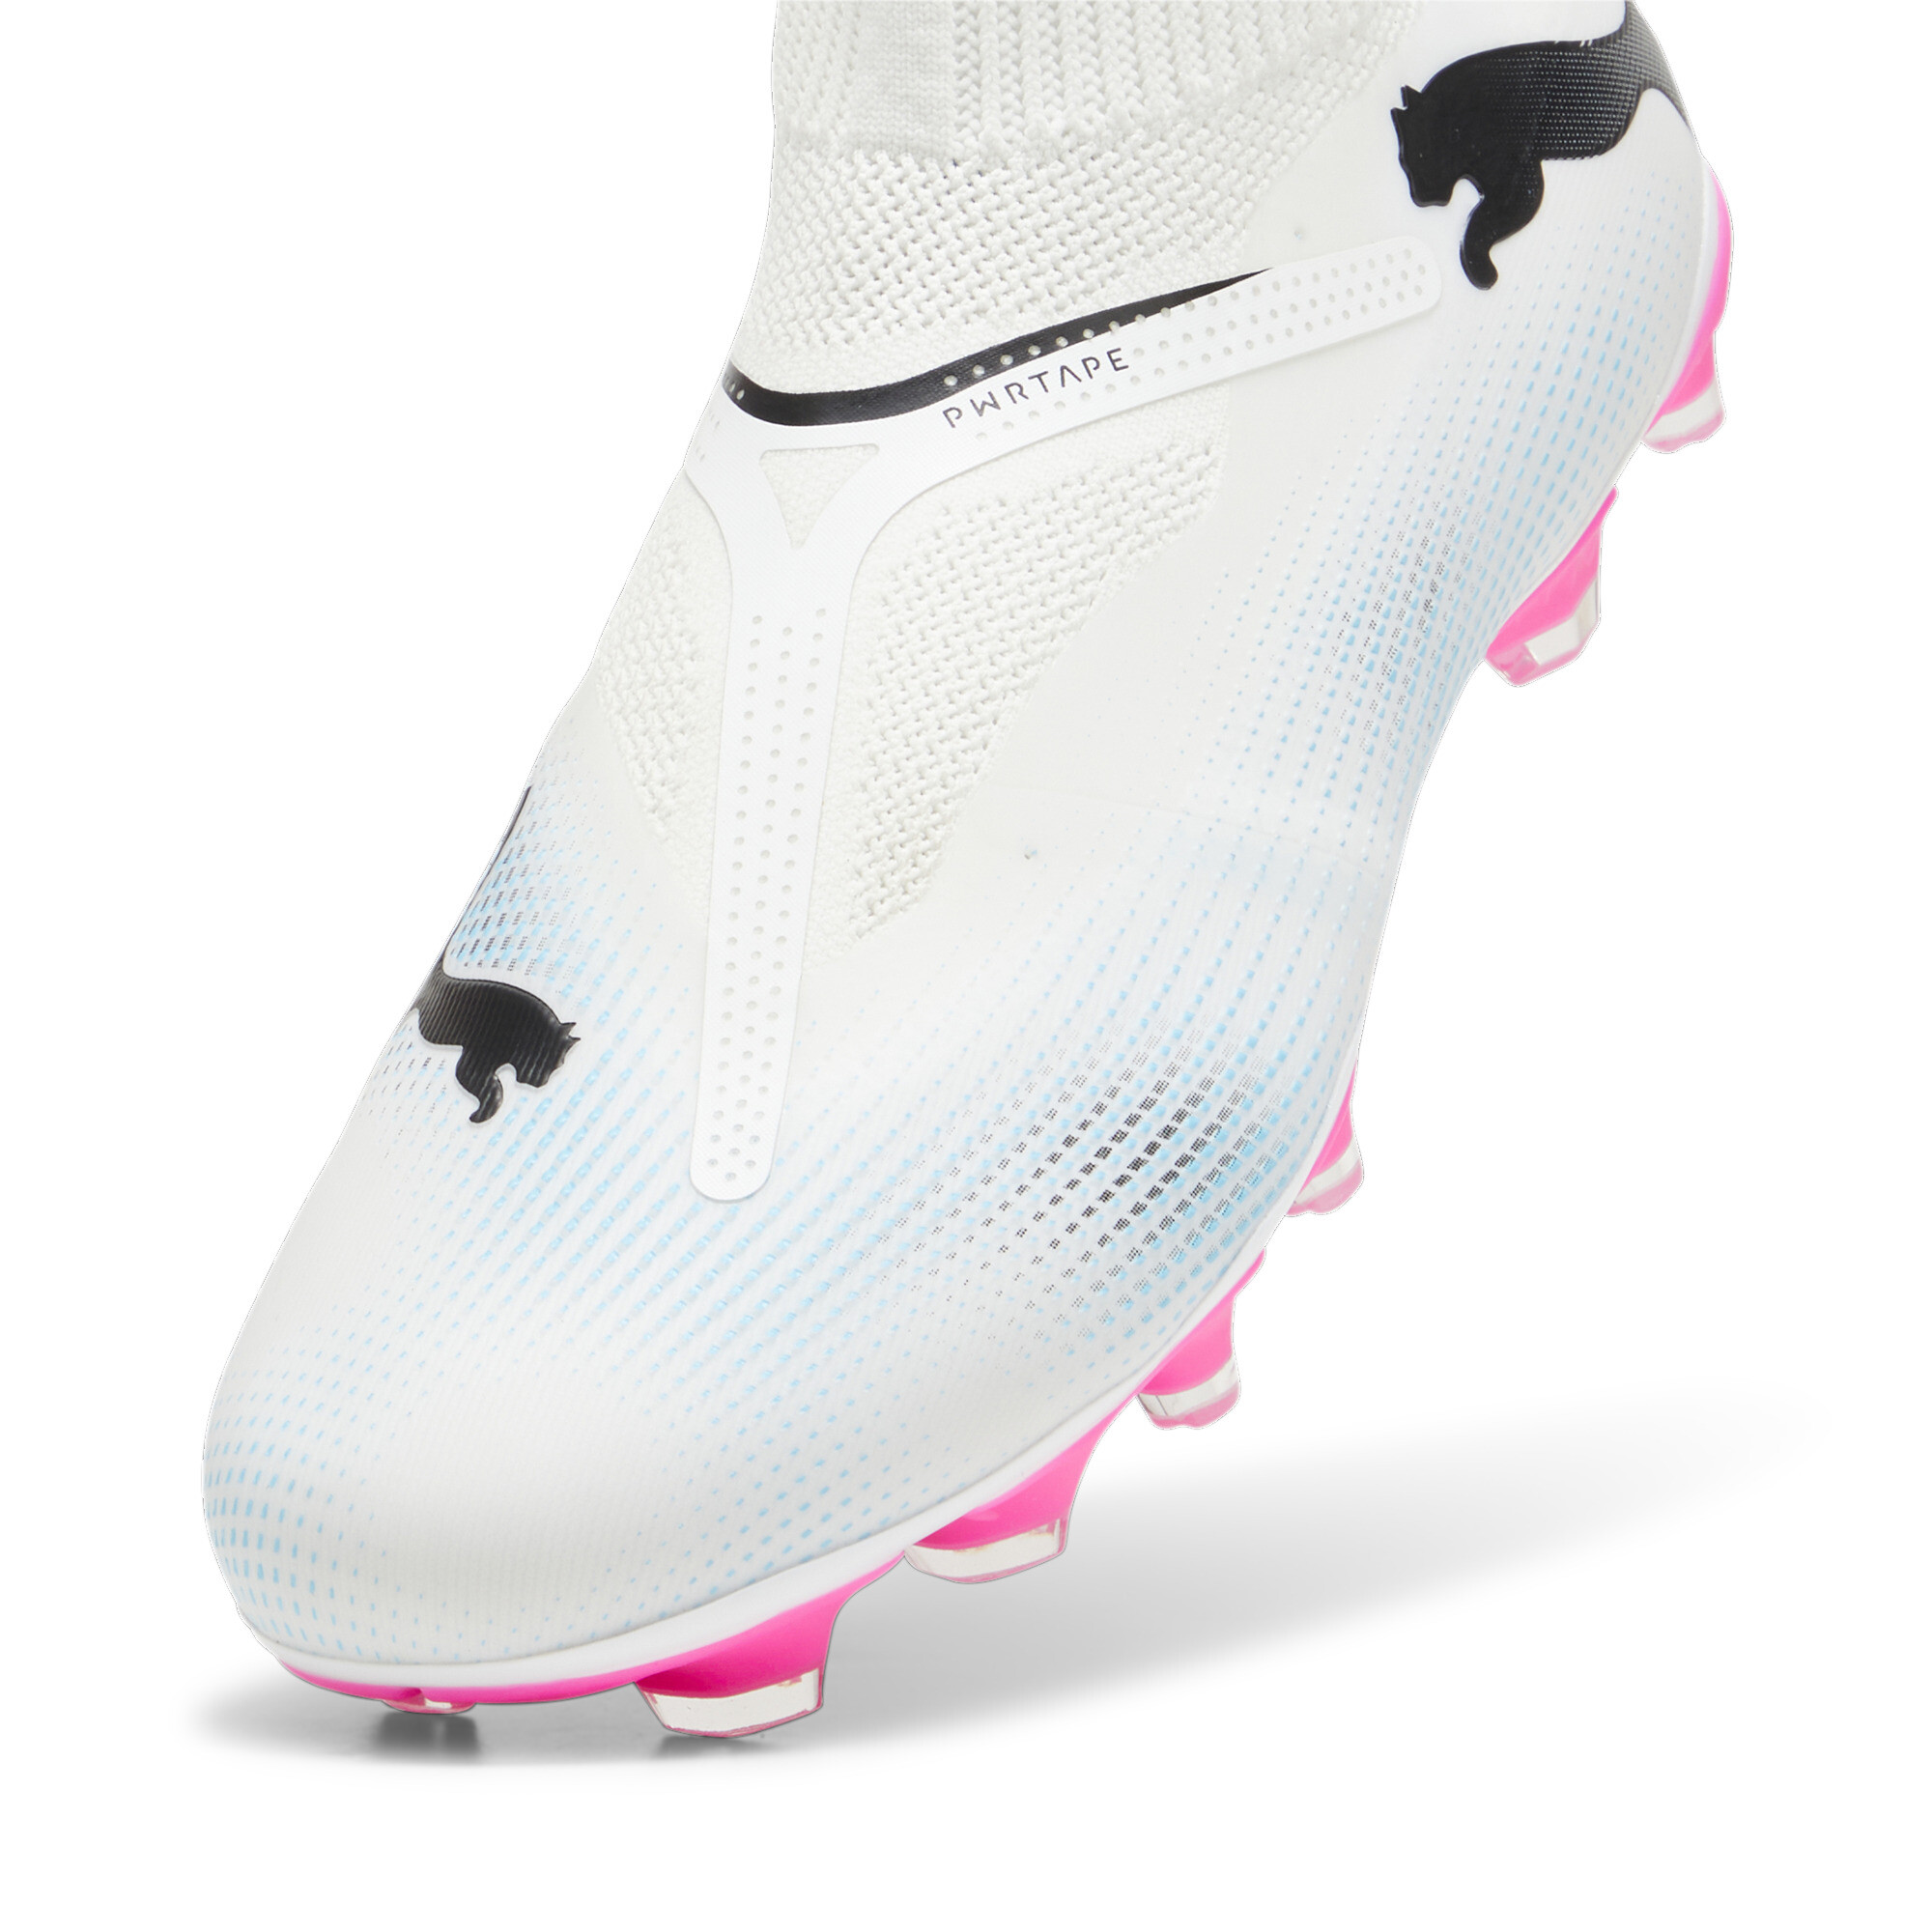 Men's PUMA FUTURE 7 MATCH FG/AG Laceless Football Boots In White/Pink, Size EU 45